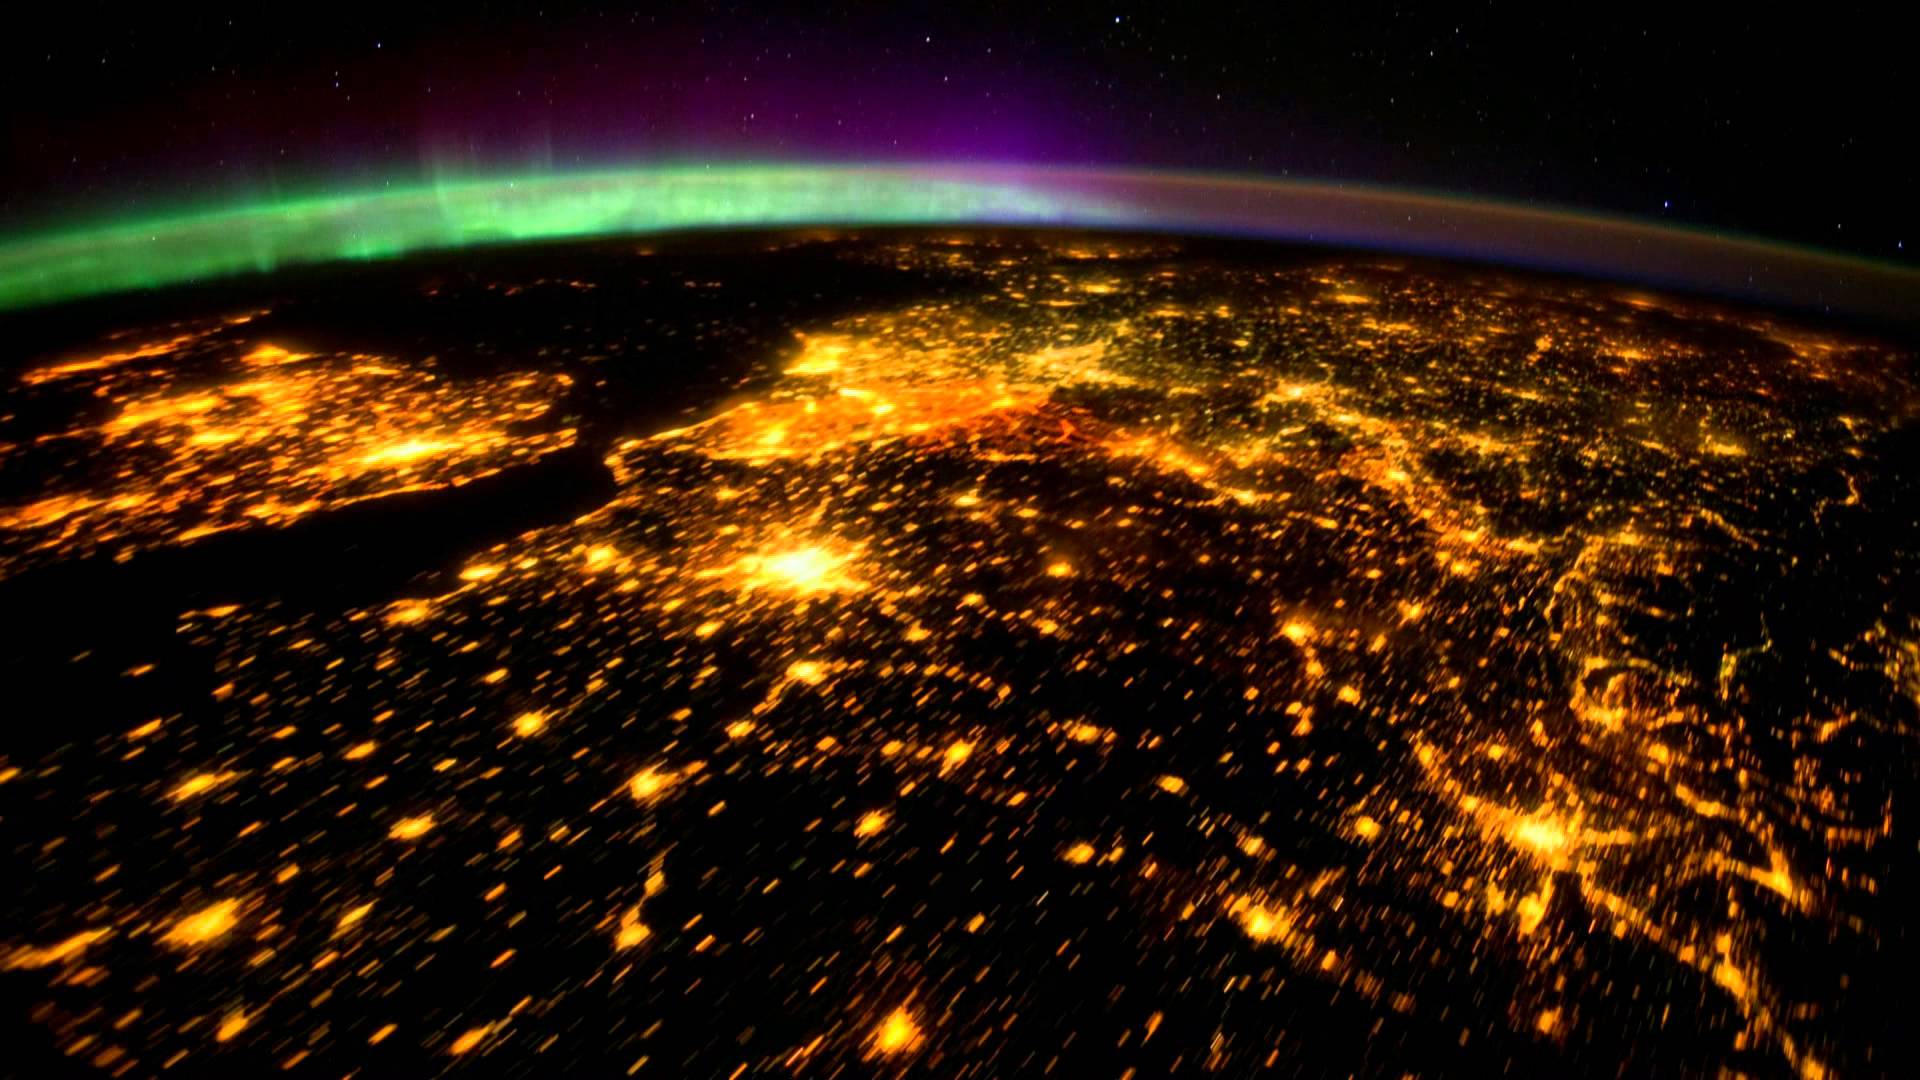 Space Iss Mainly At Night With Aurora Borealis Full HD